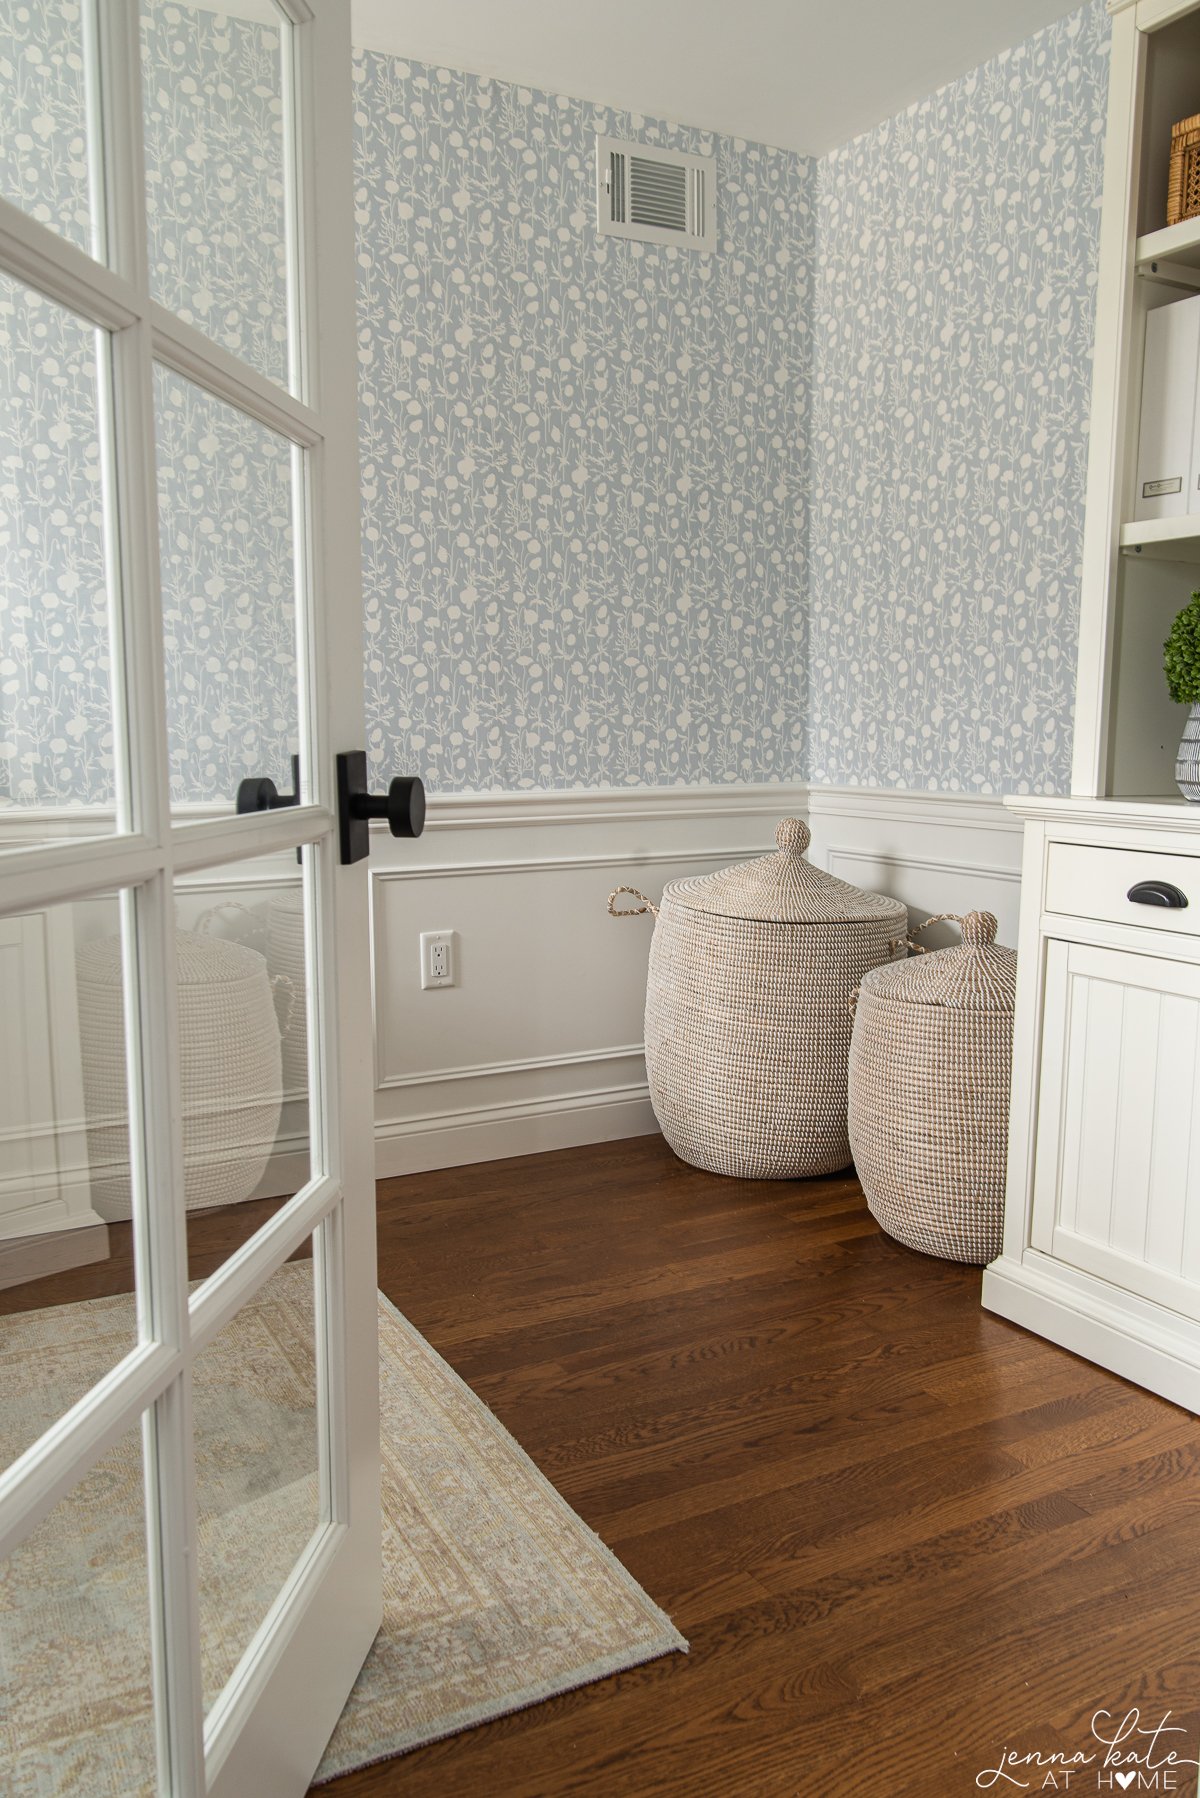 eastern exposure room with white wainscoting, white furniture and soft blue wallpaper